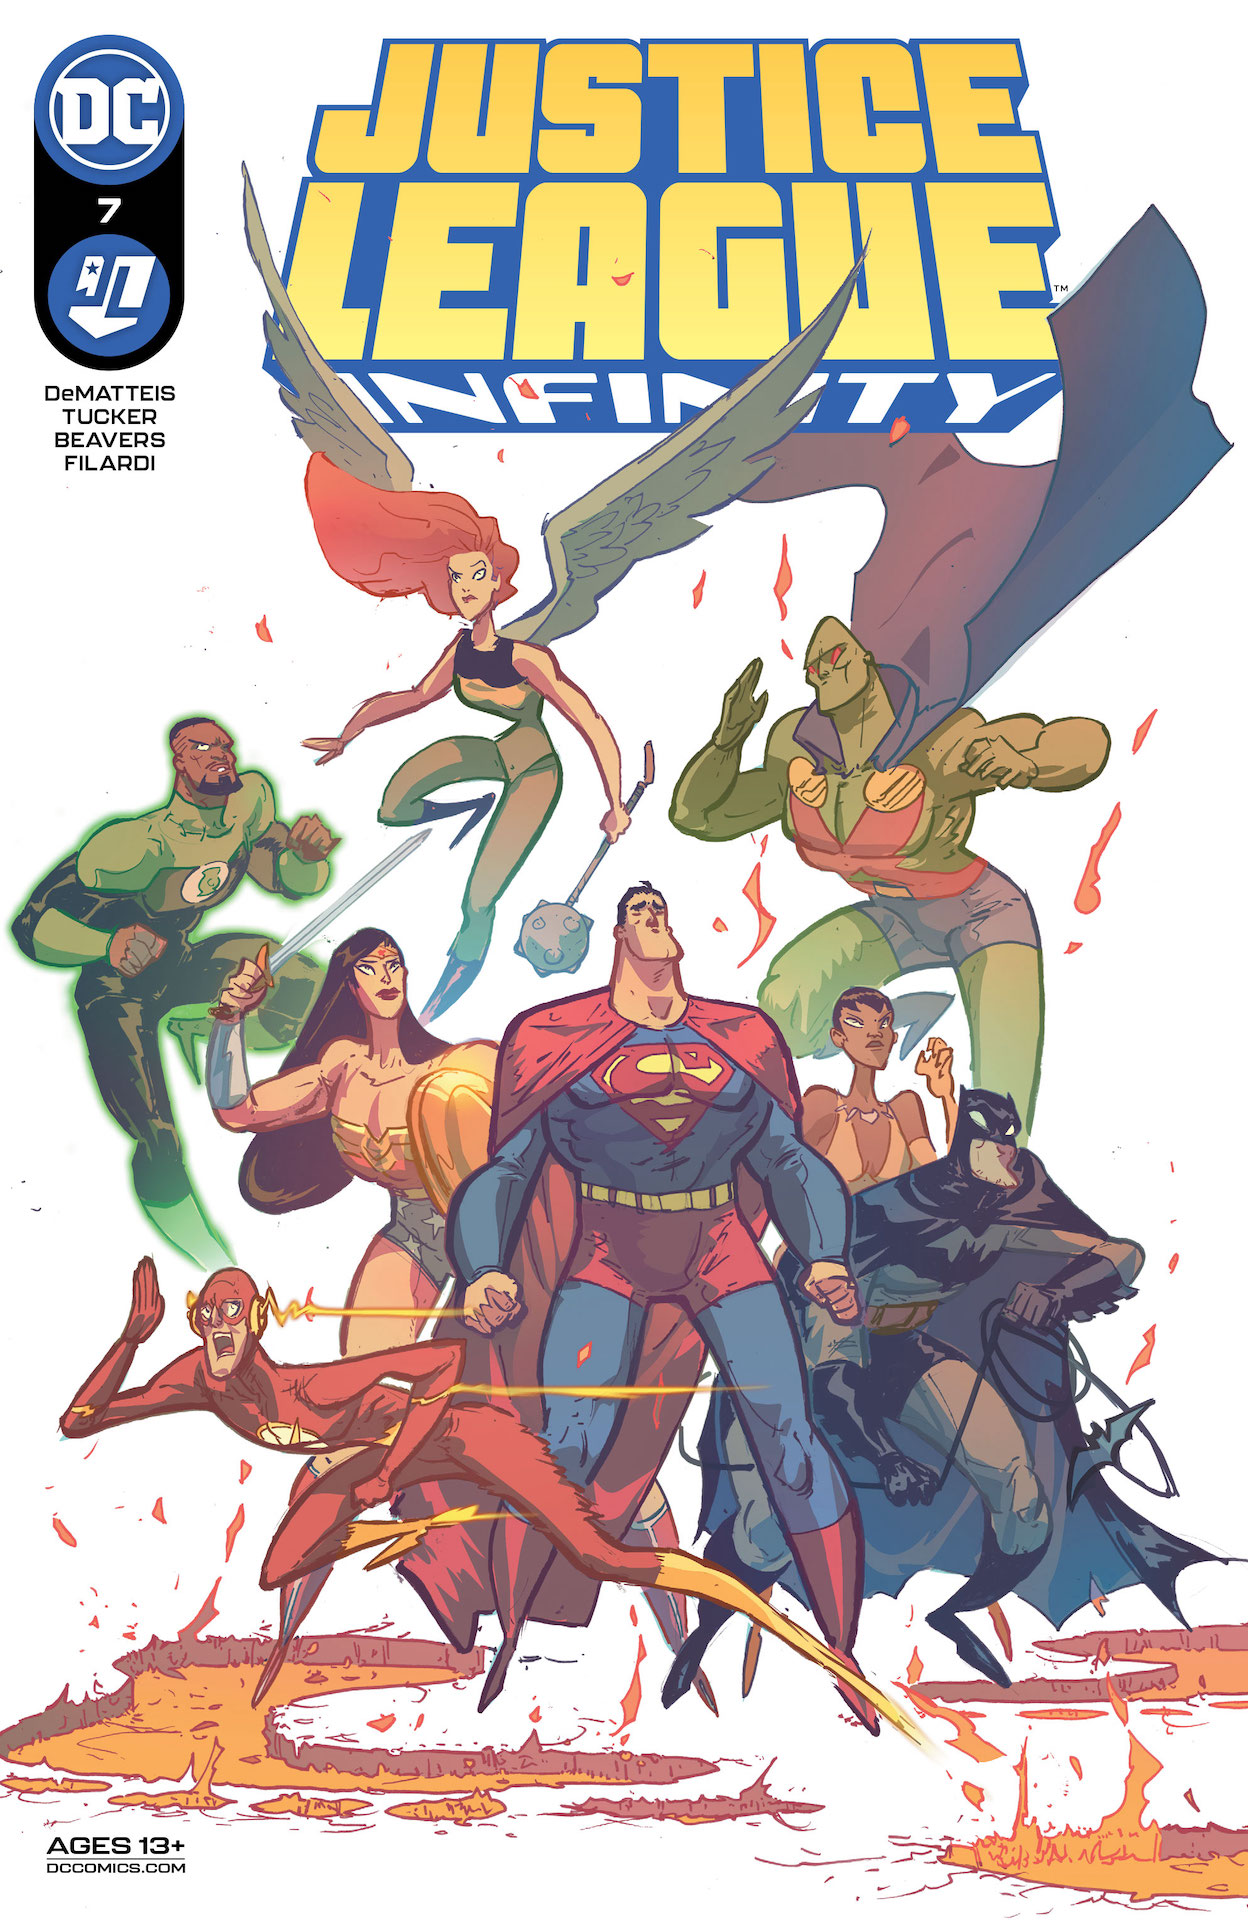 DC Preview: Justice League Infinity #7